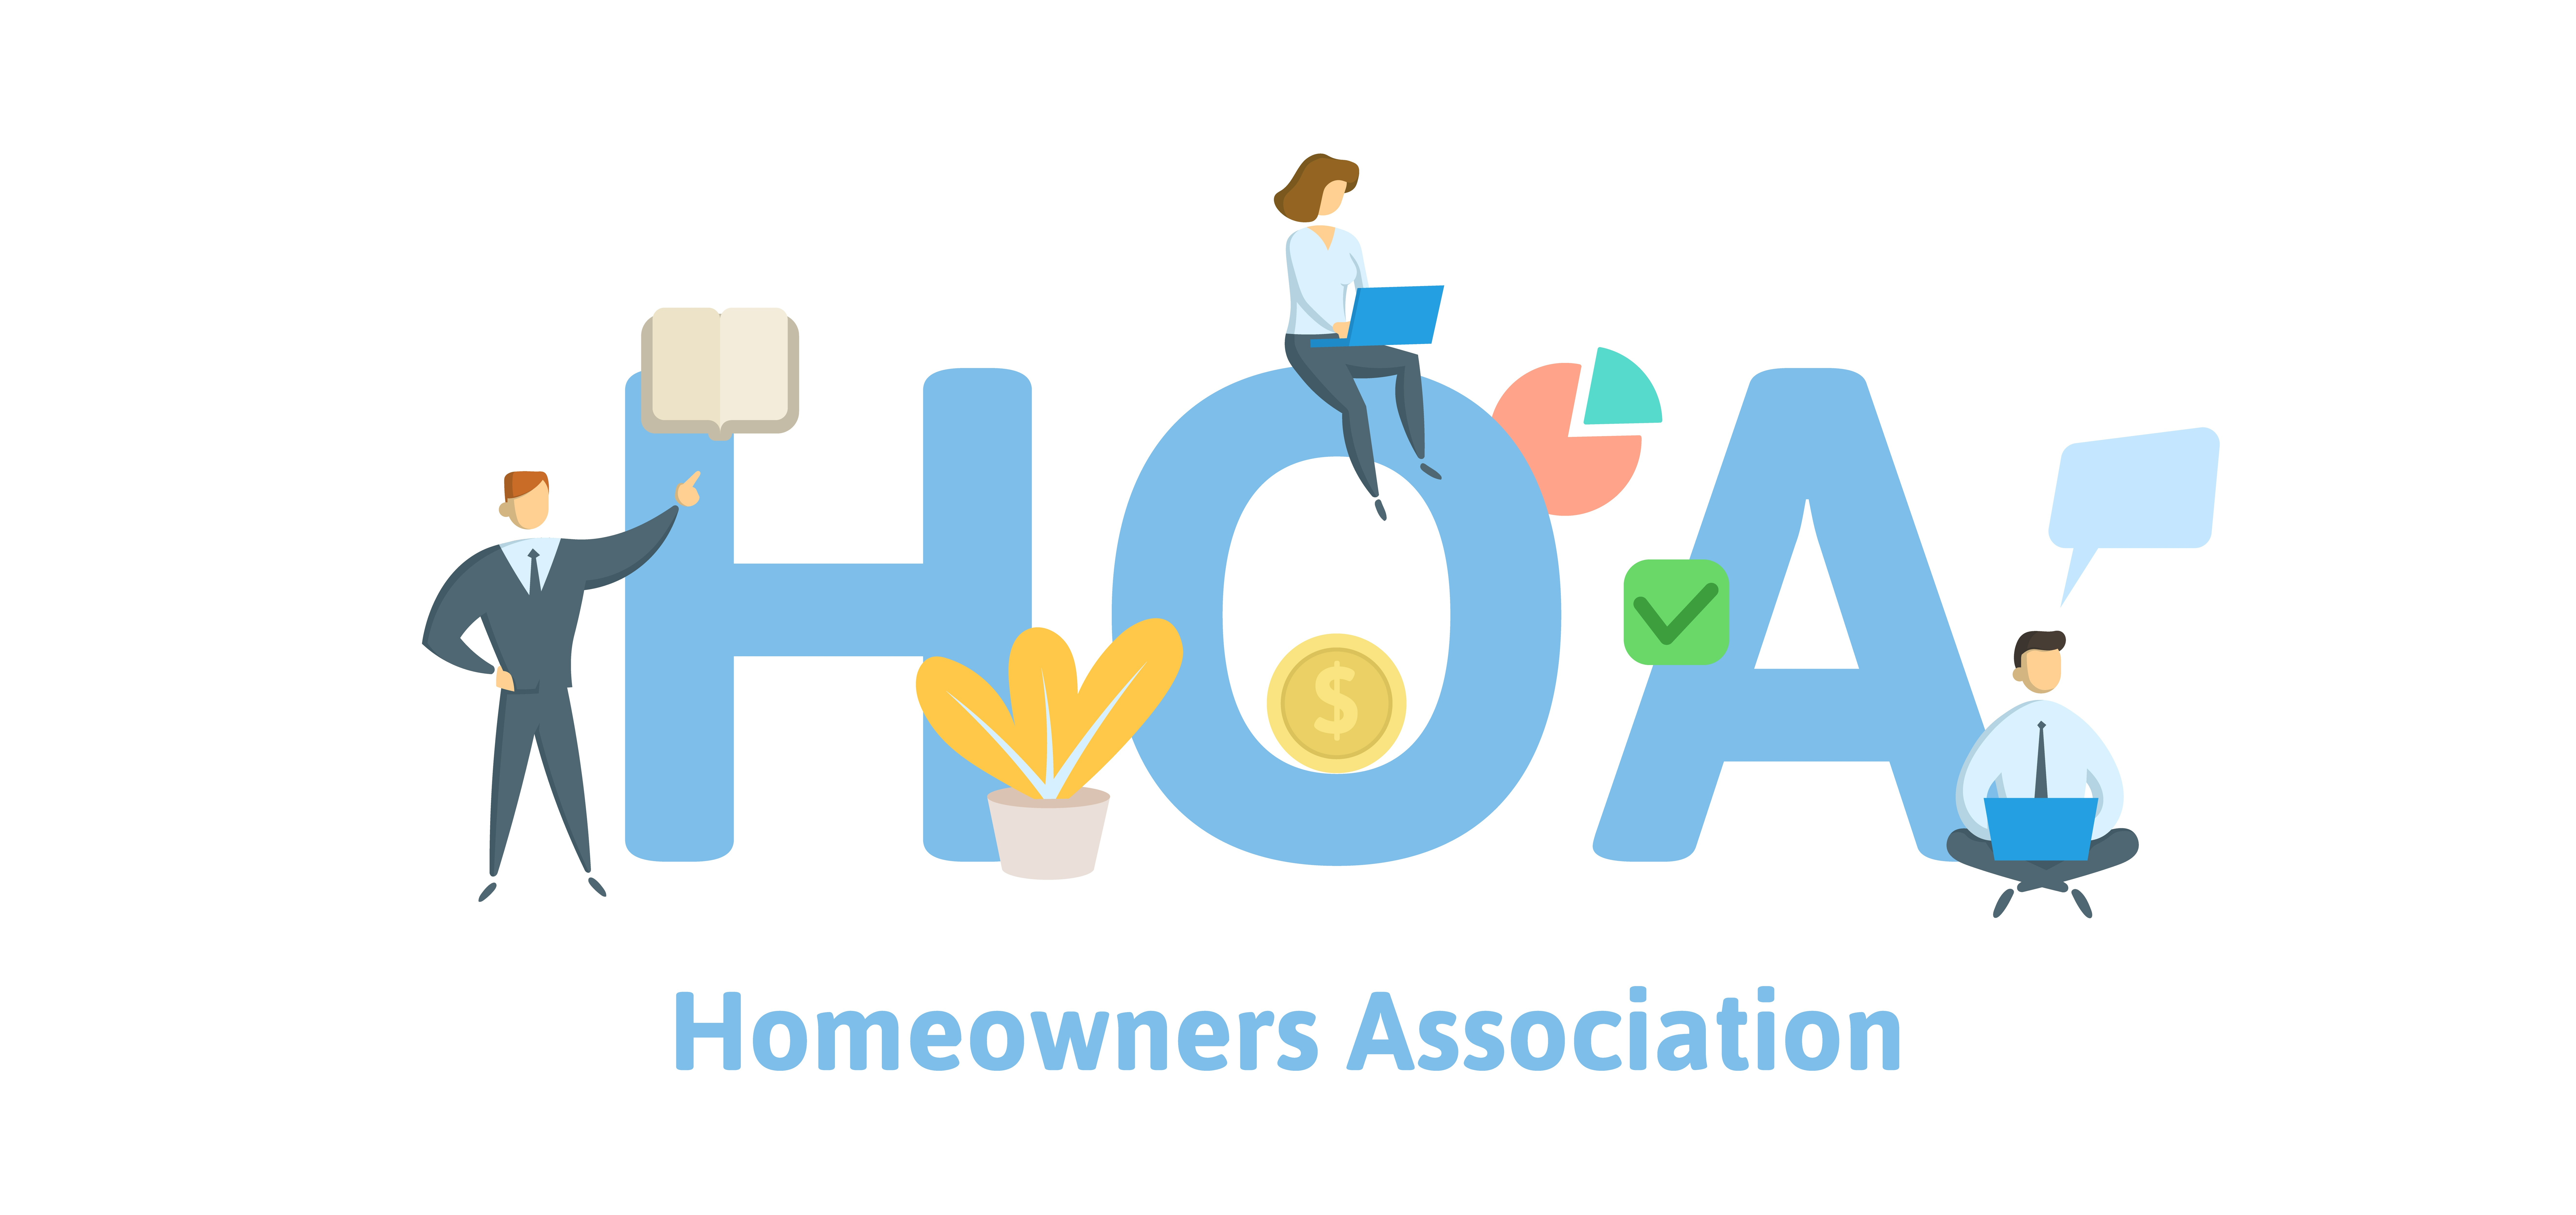 Can an HOA Management Company Save Money by Using Association Accounting Software?